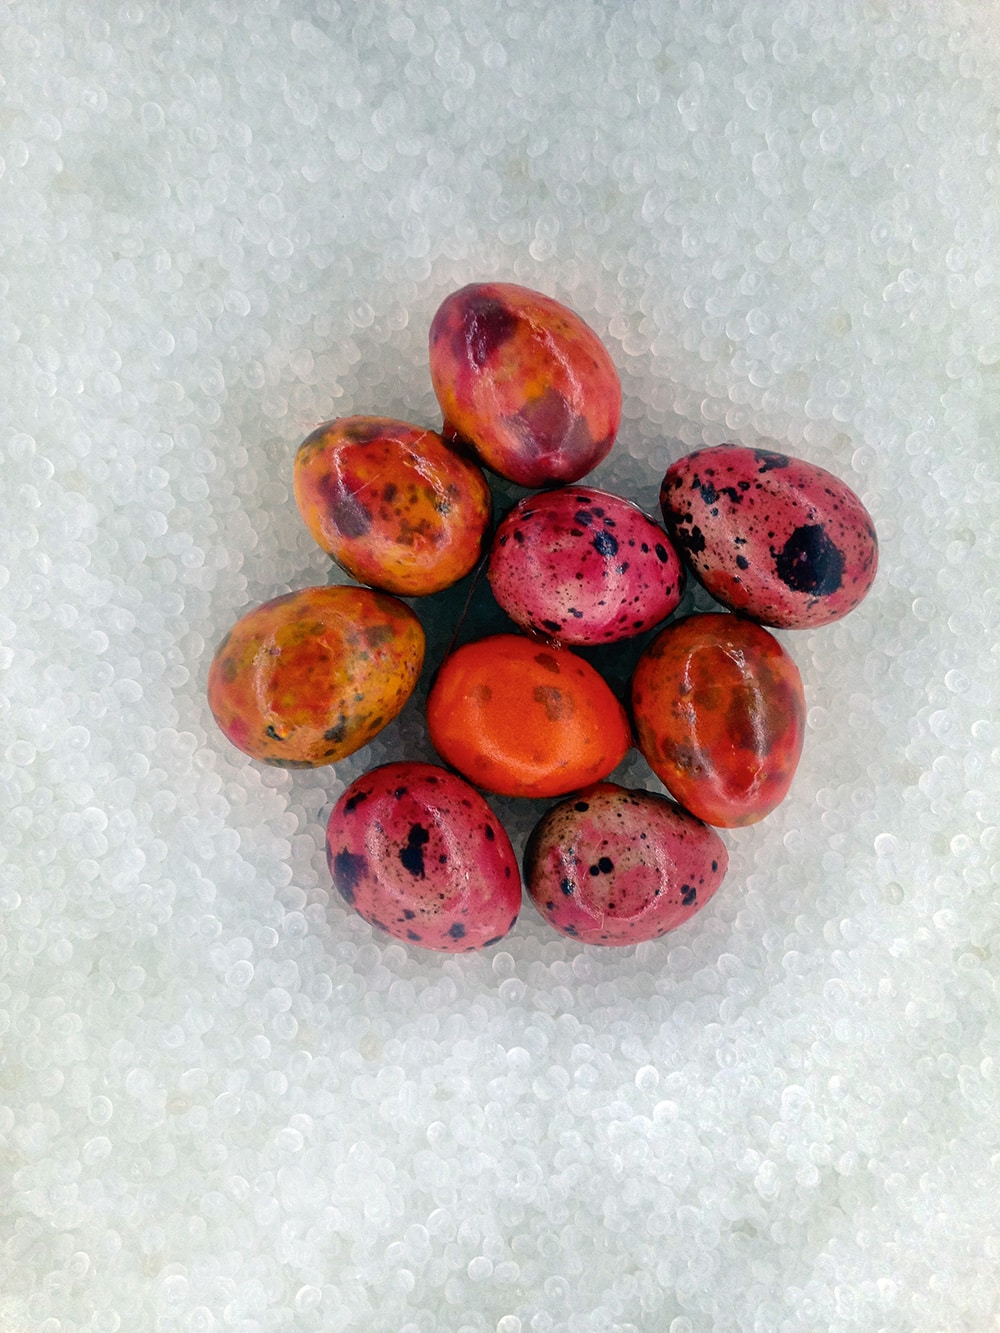 Small eggs in vibrant colors in shades of pink, red and orange with black spots in various sizes. The eggs lay on a white grainy surface.